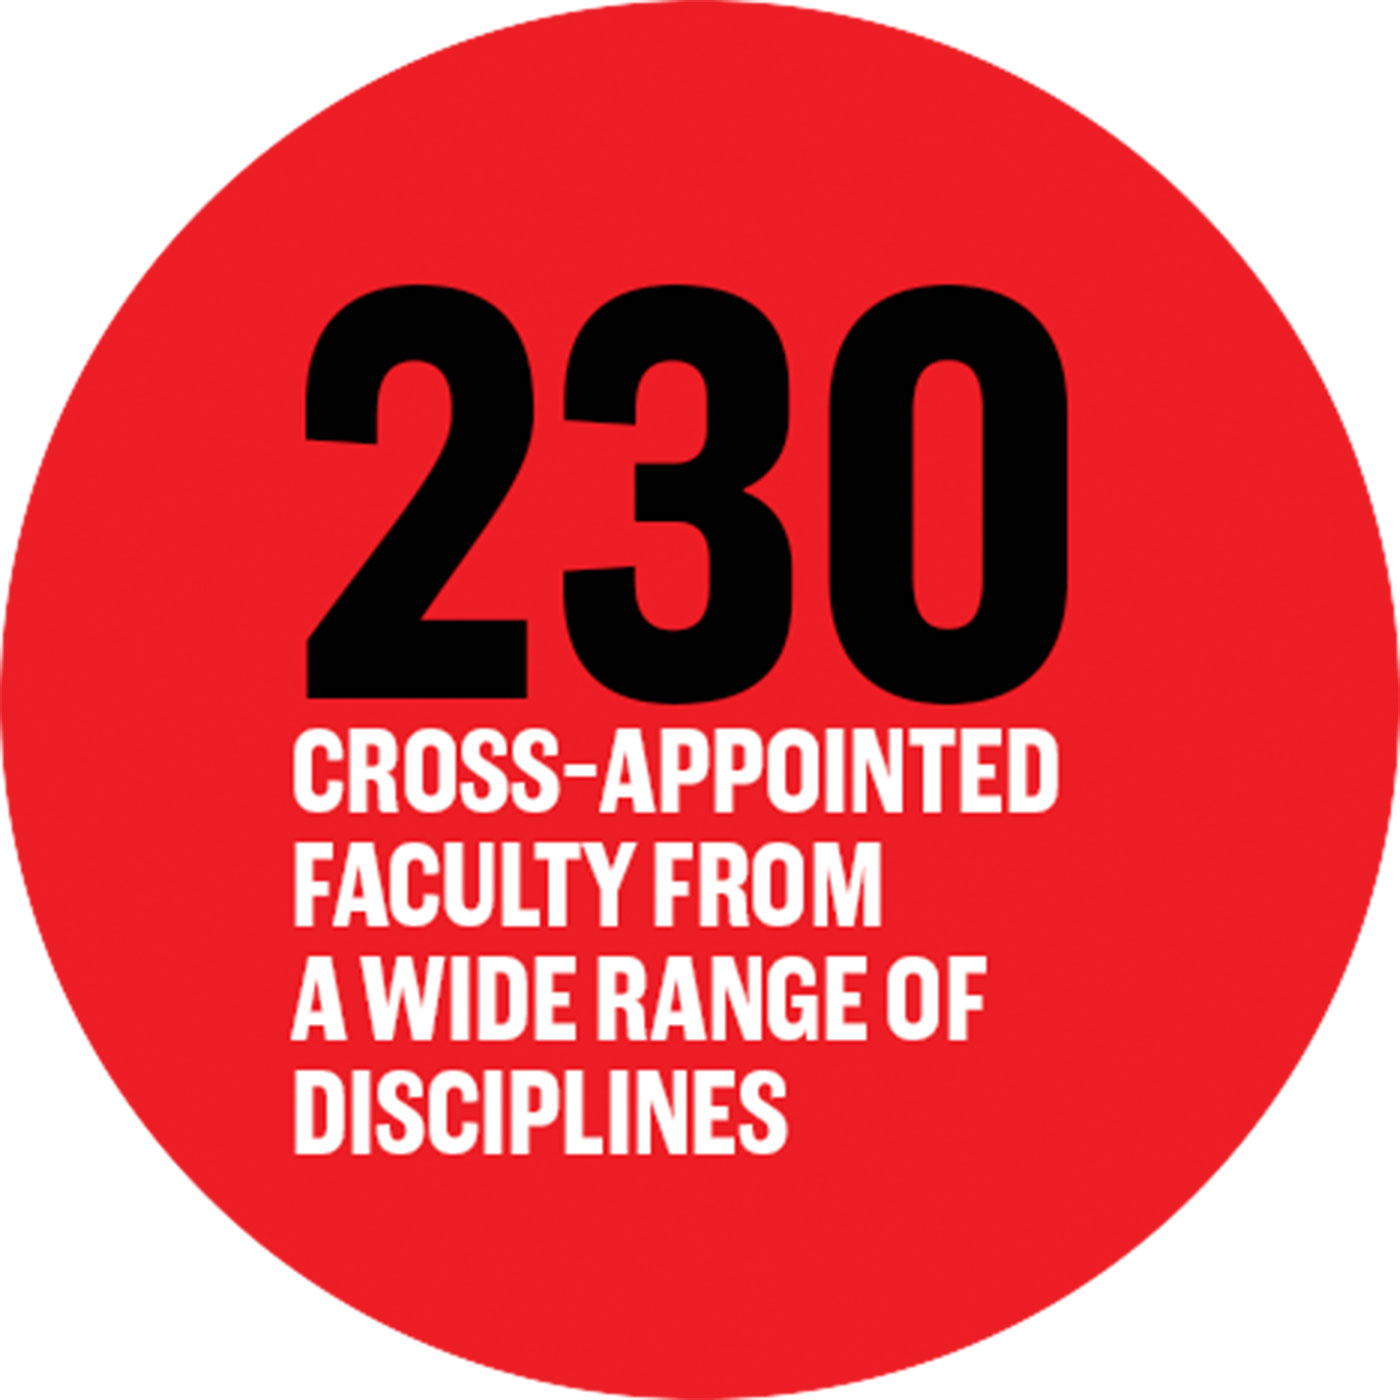 230 cross-appointed faculty from a wide range of disciplines